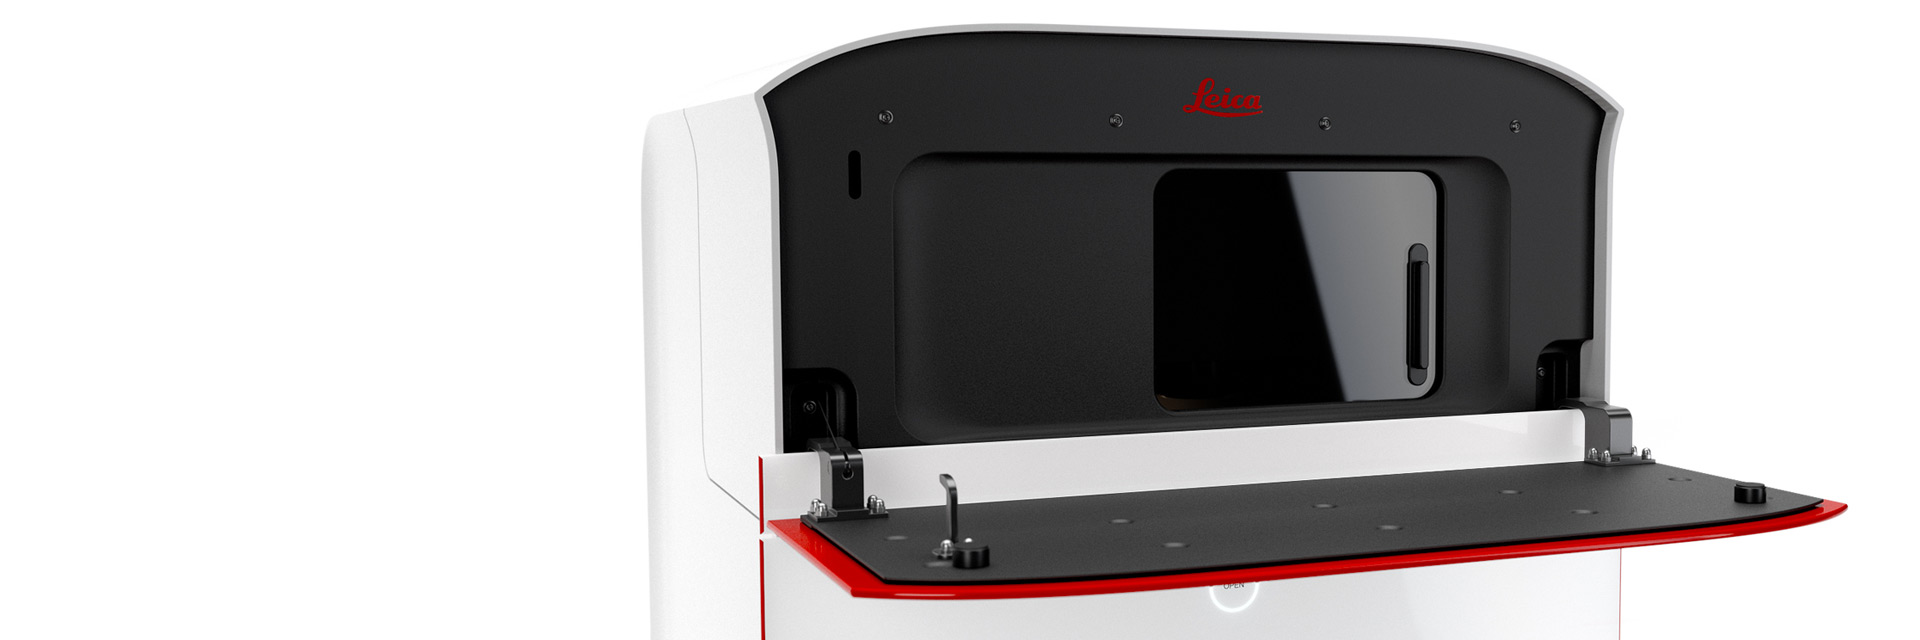 https://www.leica-microsystems.com/fileadmin/content_excellence/product_overview/inverted-microscopes/mica-banner/lms-mica-header-3_1.jpg